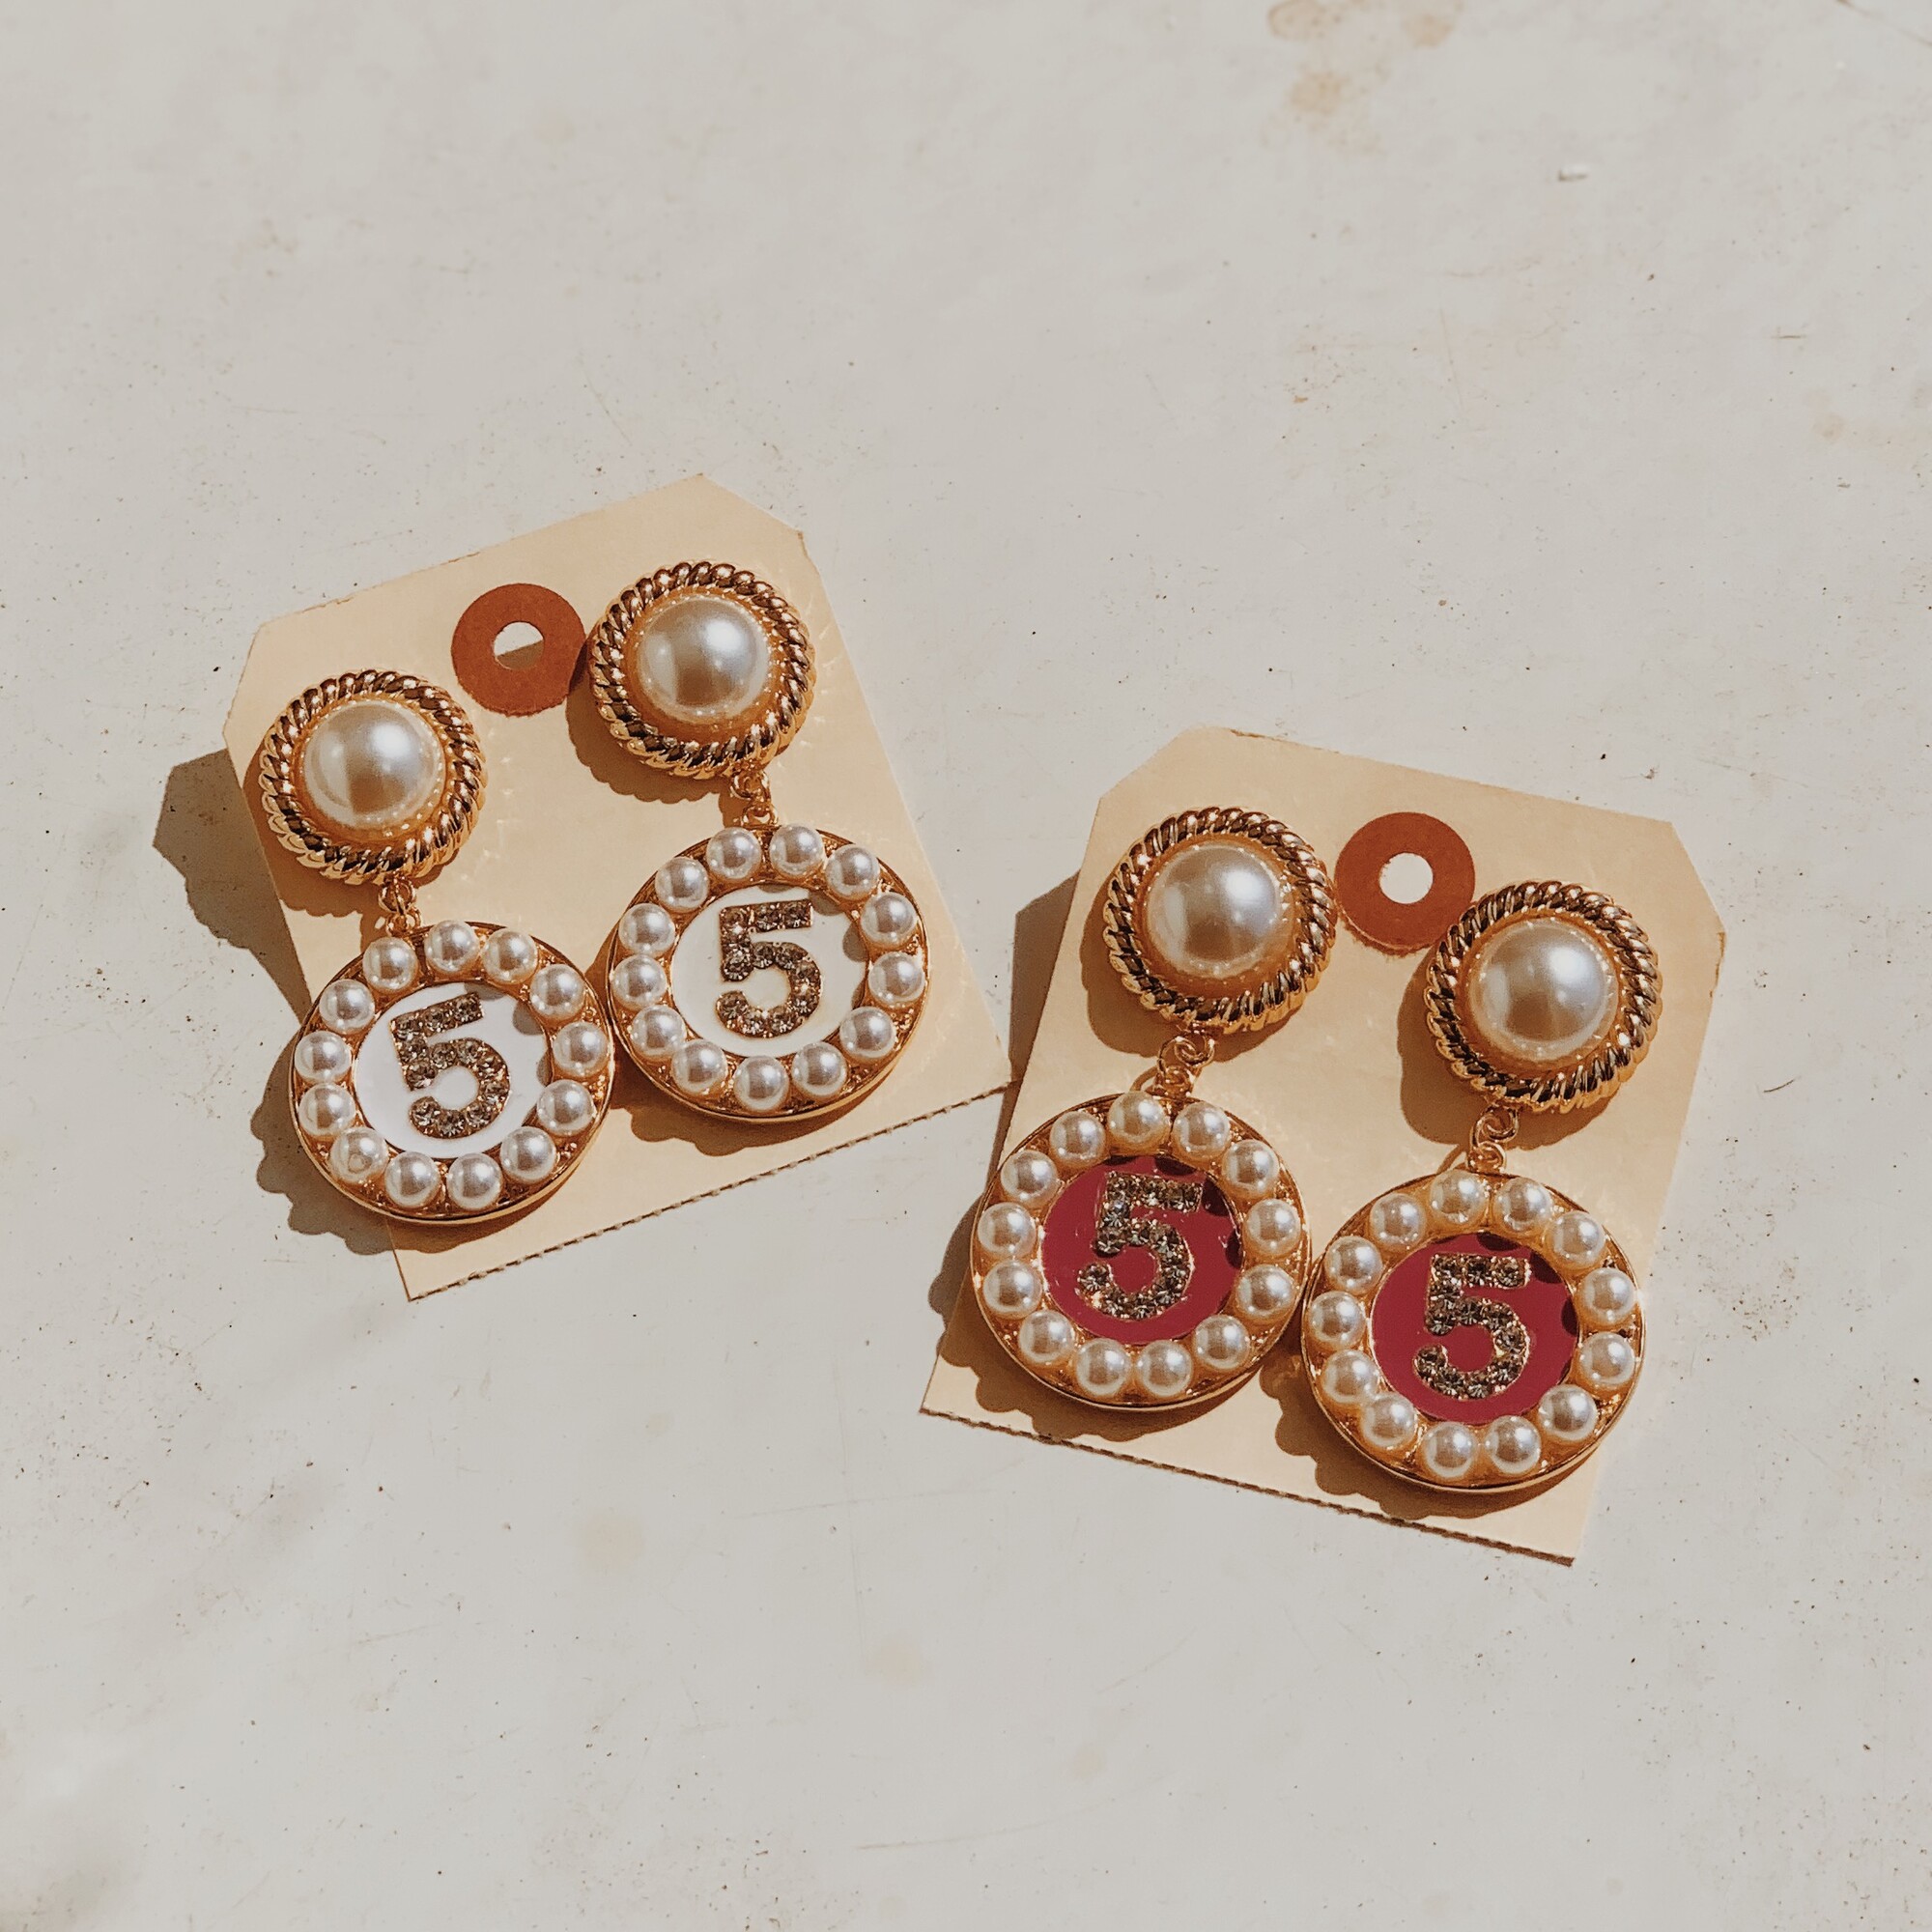 These fun earrings are bedazzled in faux pearls and rhinestones and have the number 5 on them! They measure 2.5 inches in length and are available in white or pink.